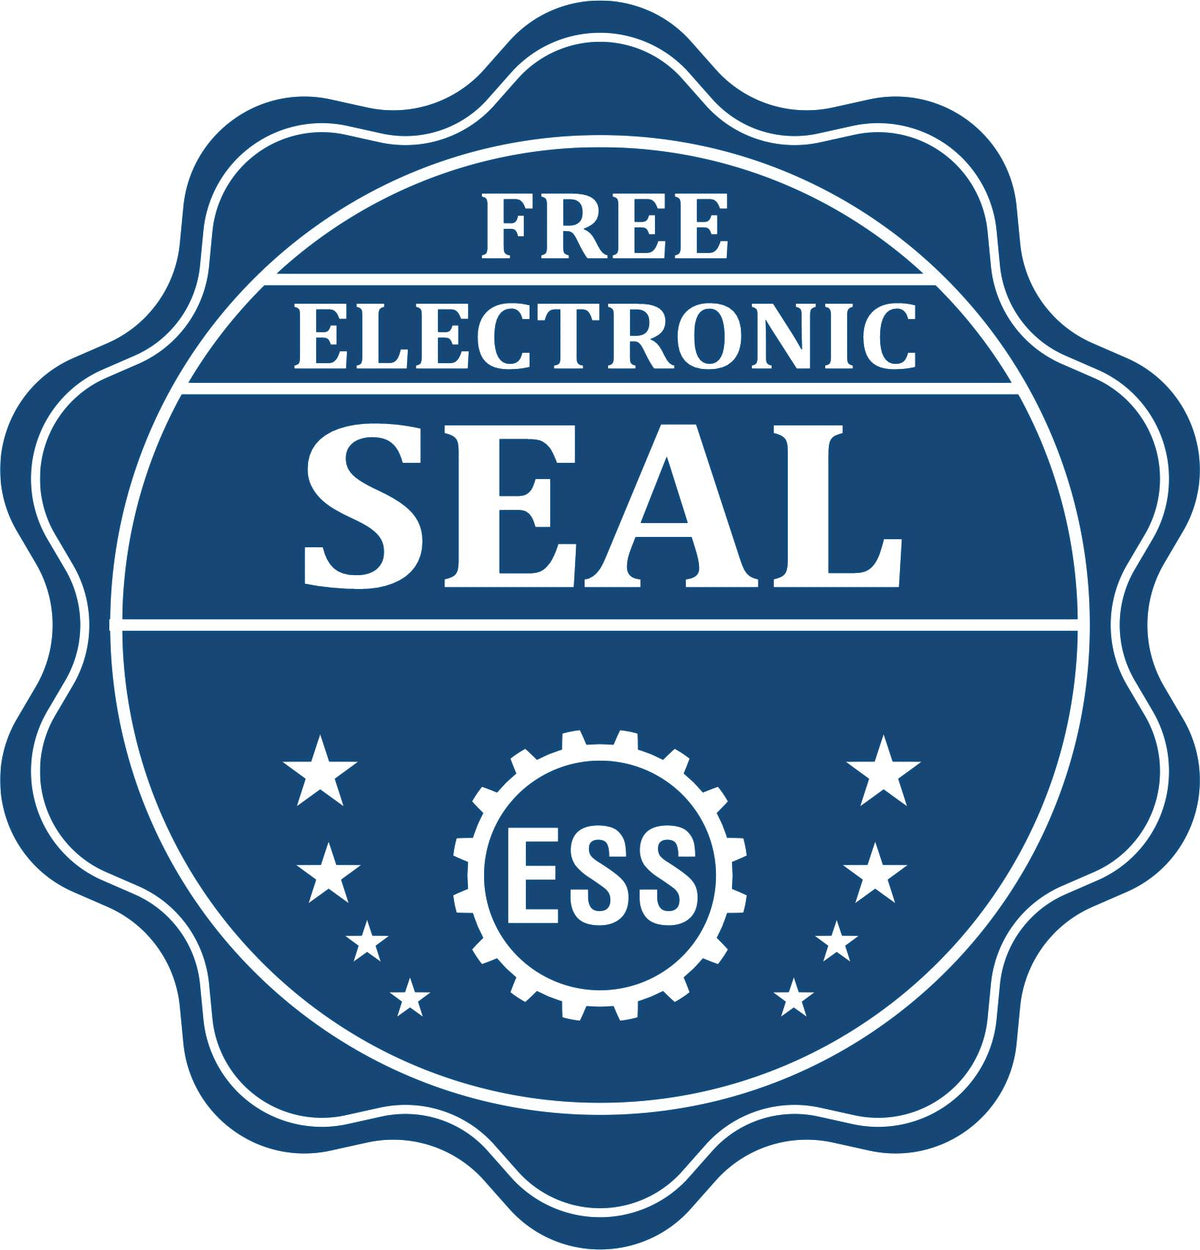 A badge showing a free electronic seal for the Slim Pre-Inked Pennsylvania Professional Engineer Seal Stamp with stars and the ESS gear on the emblem.